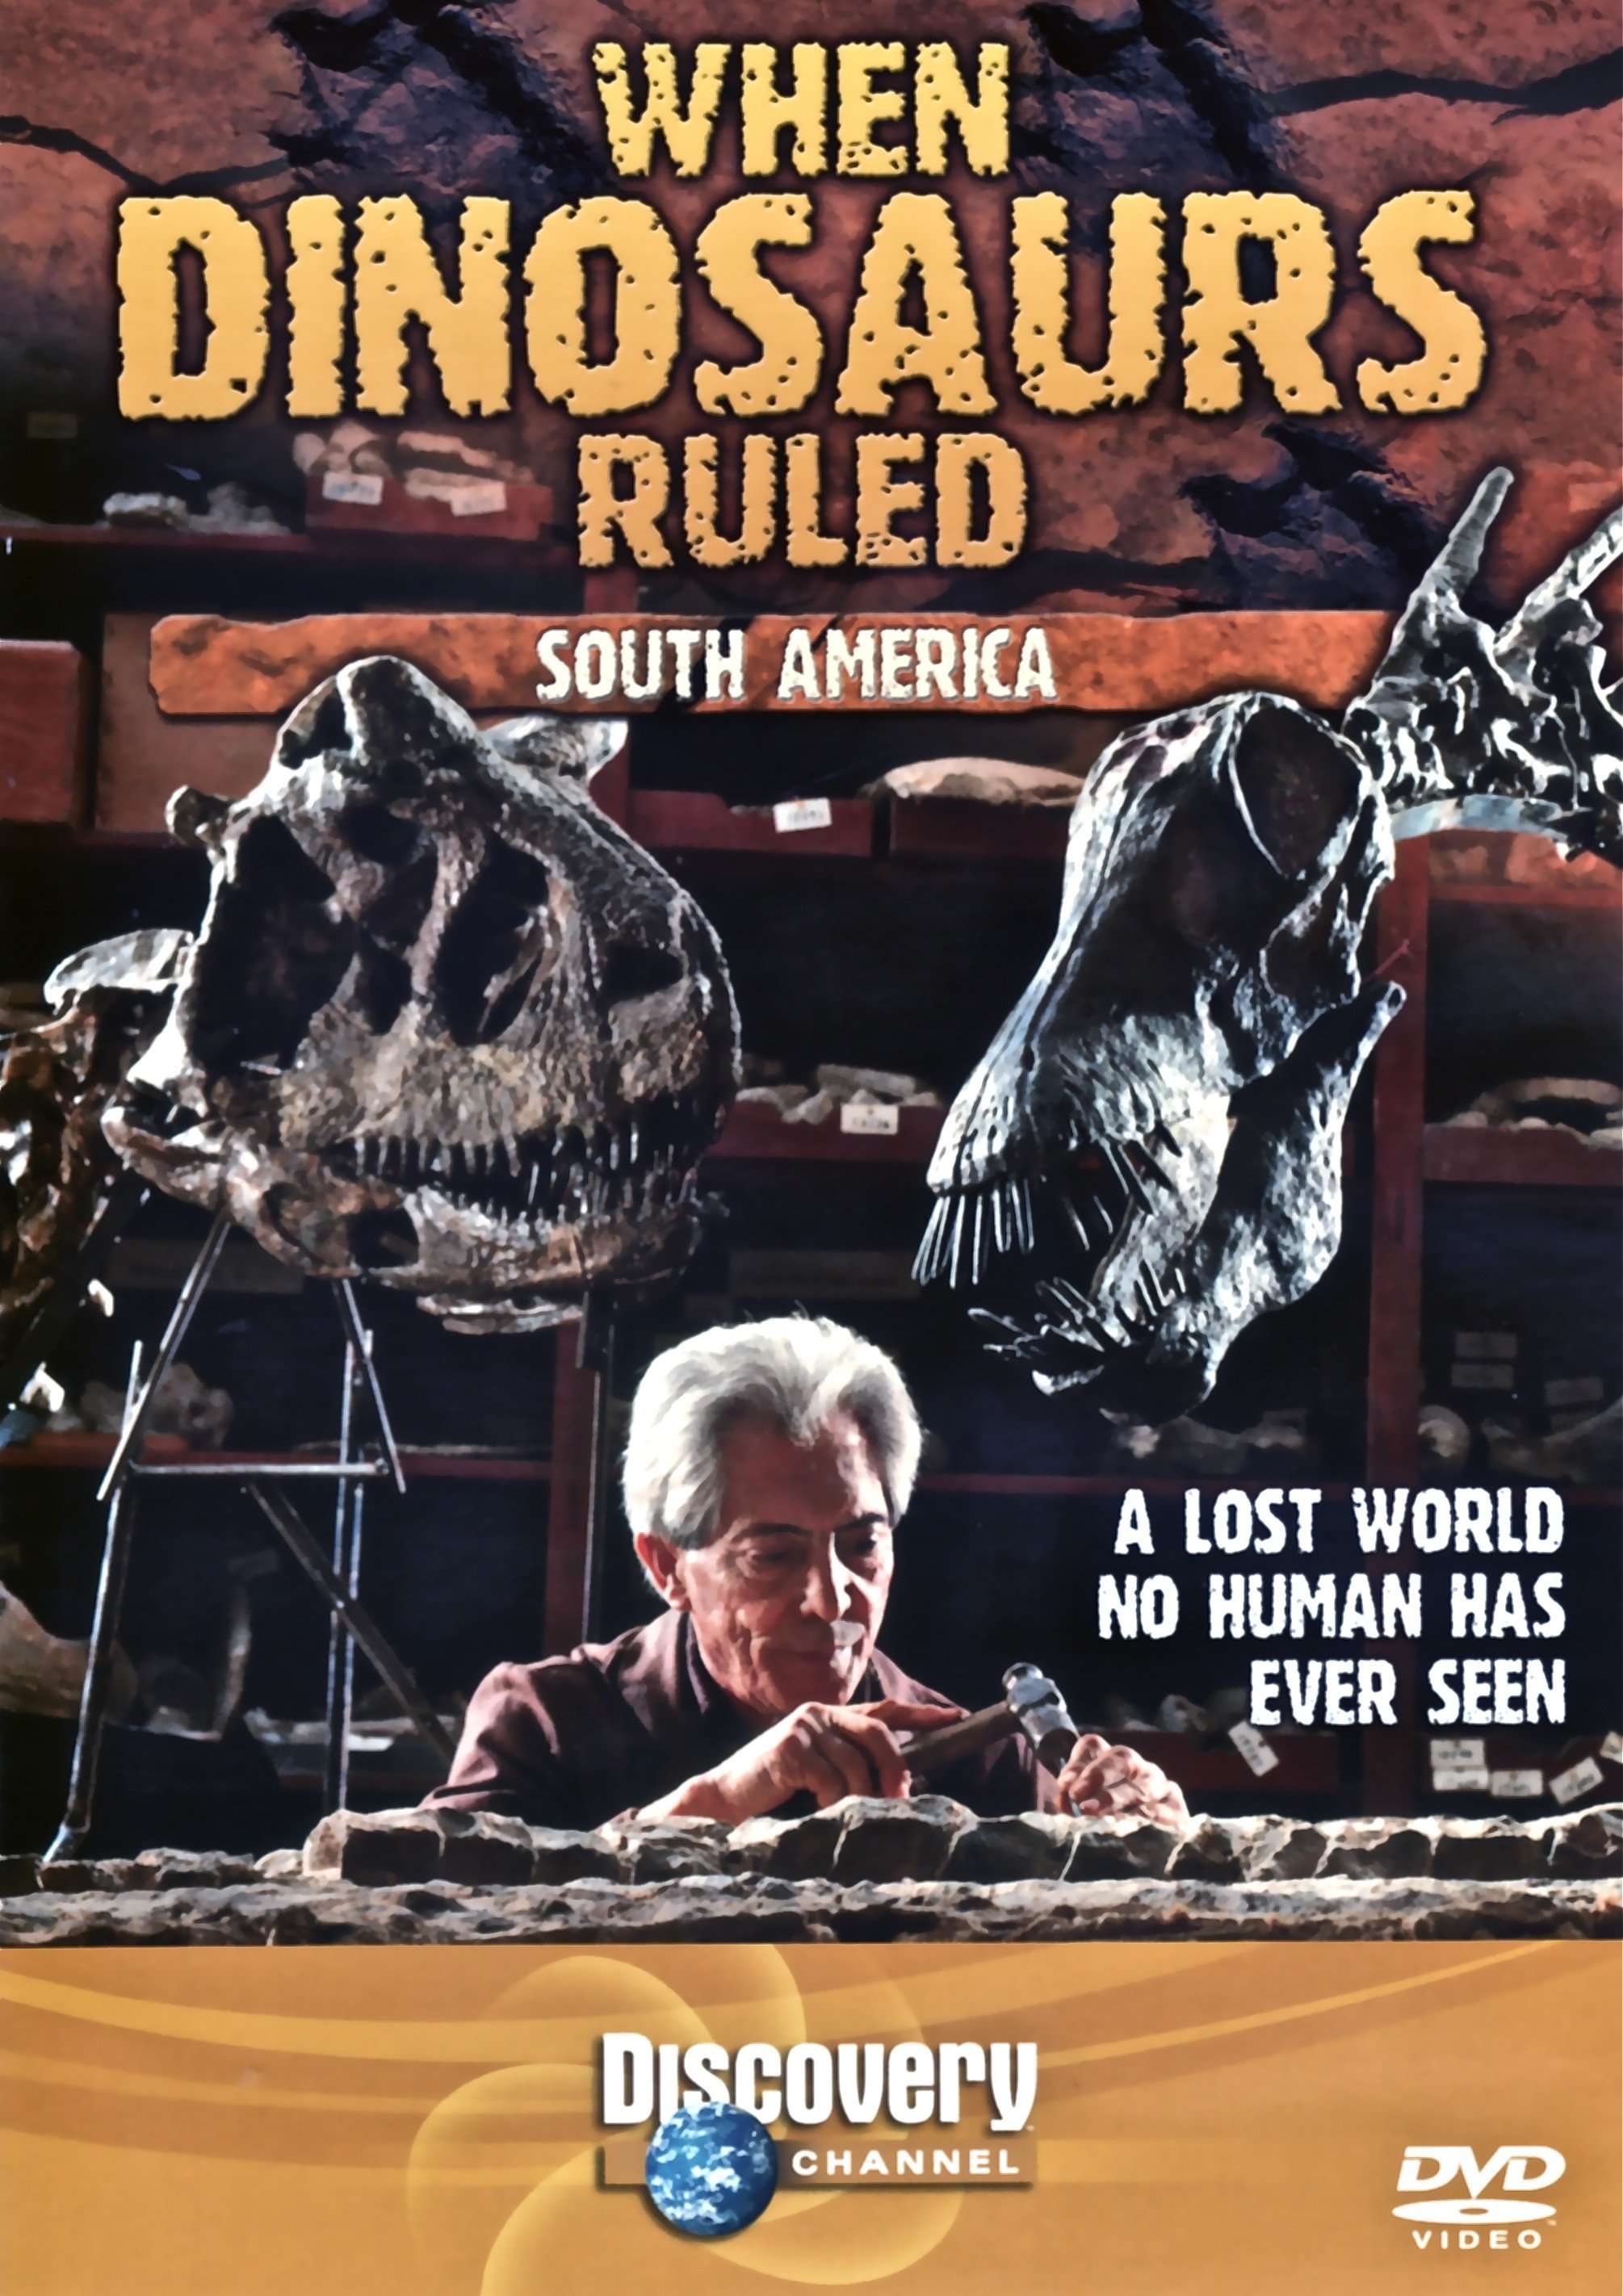 When Dinosaurs Ruled